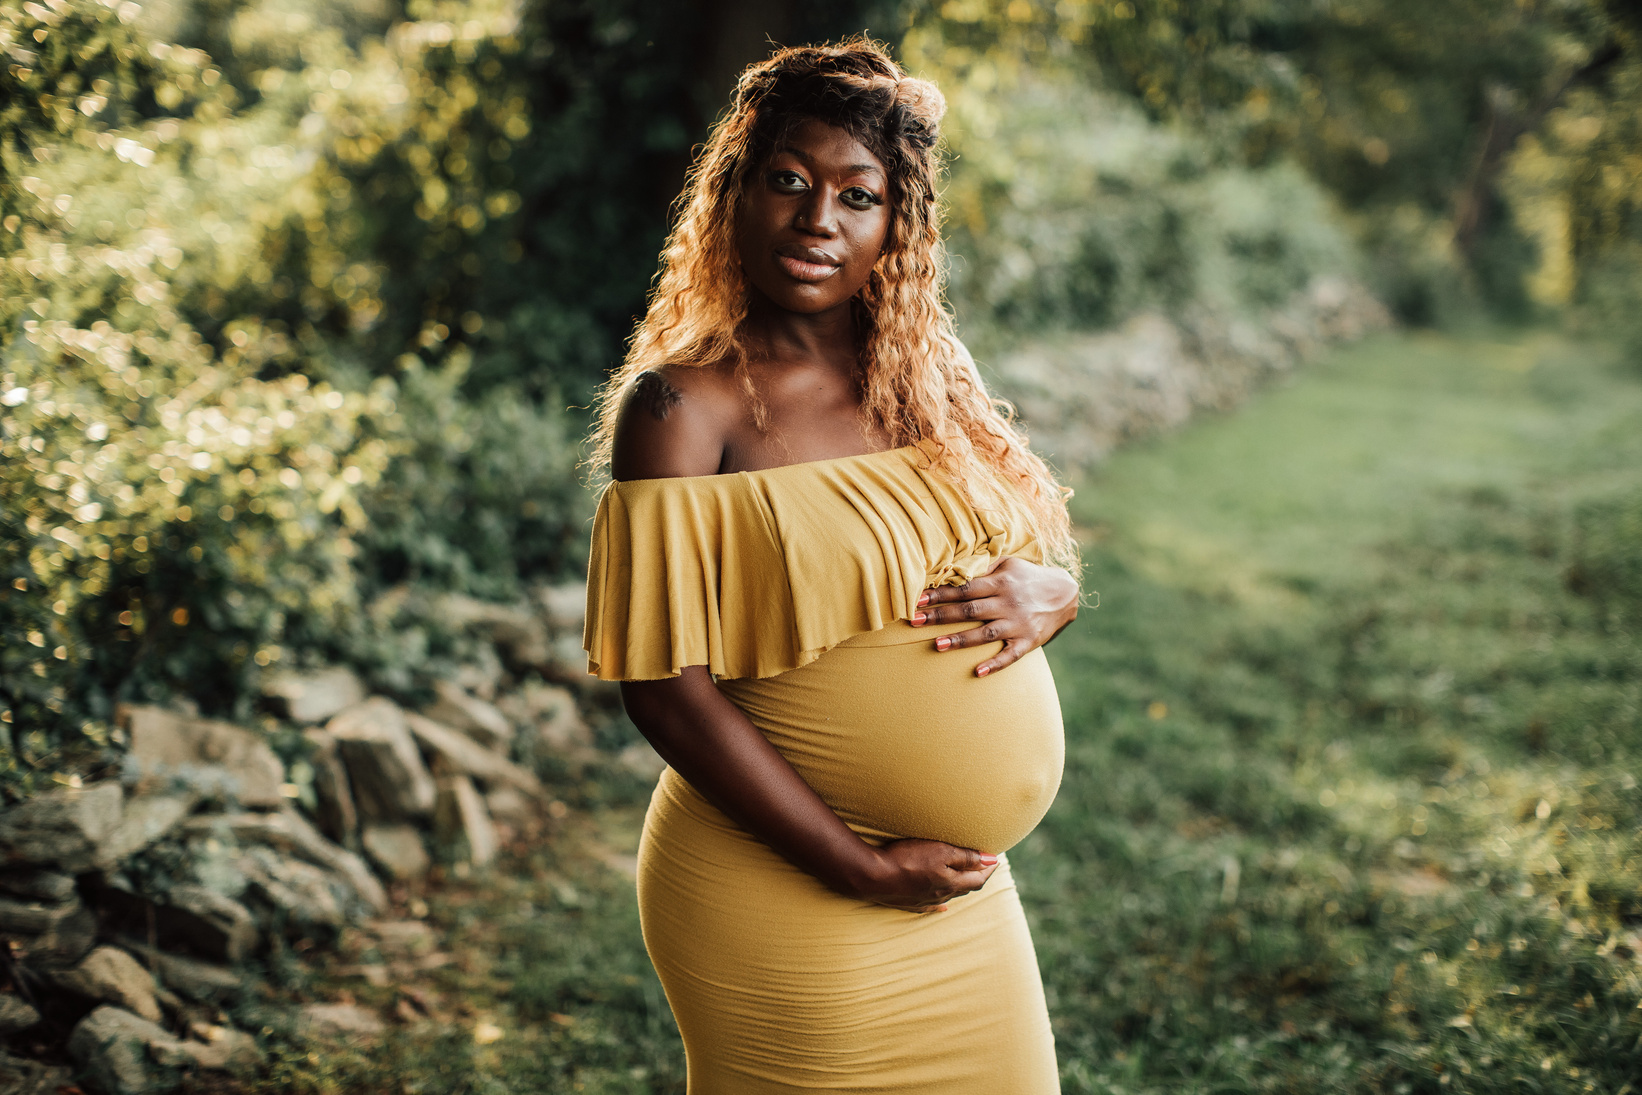 Portrait of a Pregnant Woman Outdoors